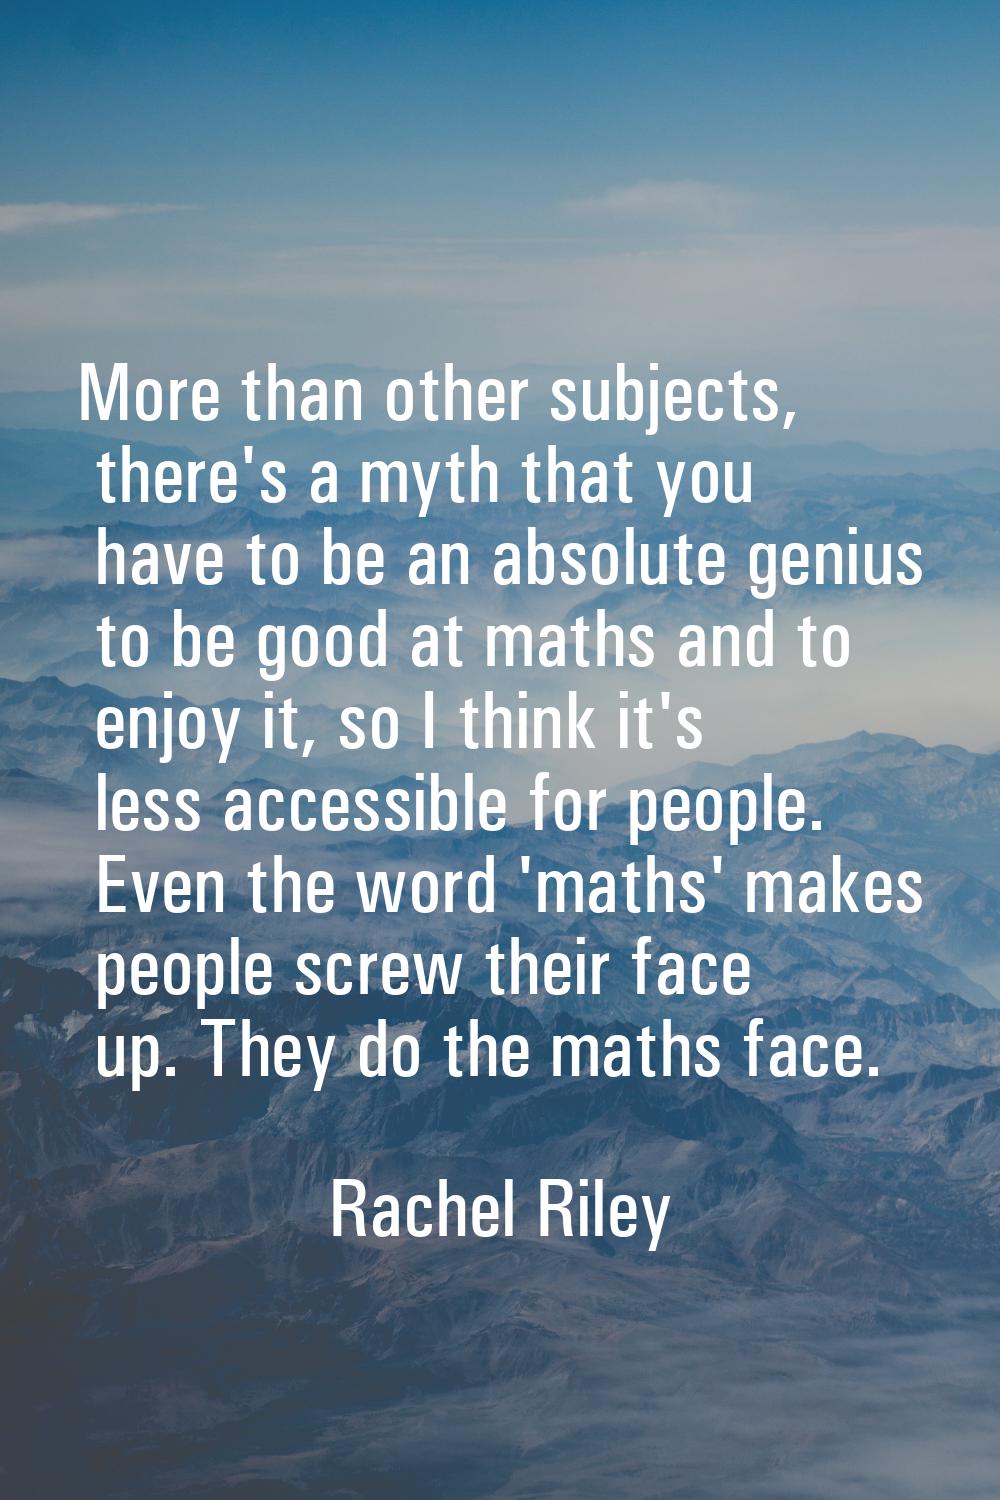 More than other subjects, there's a myth that you have to be an absolute genius to be good at maths